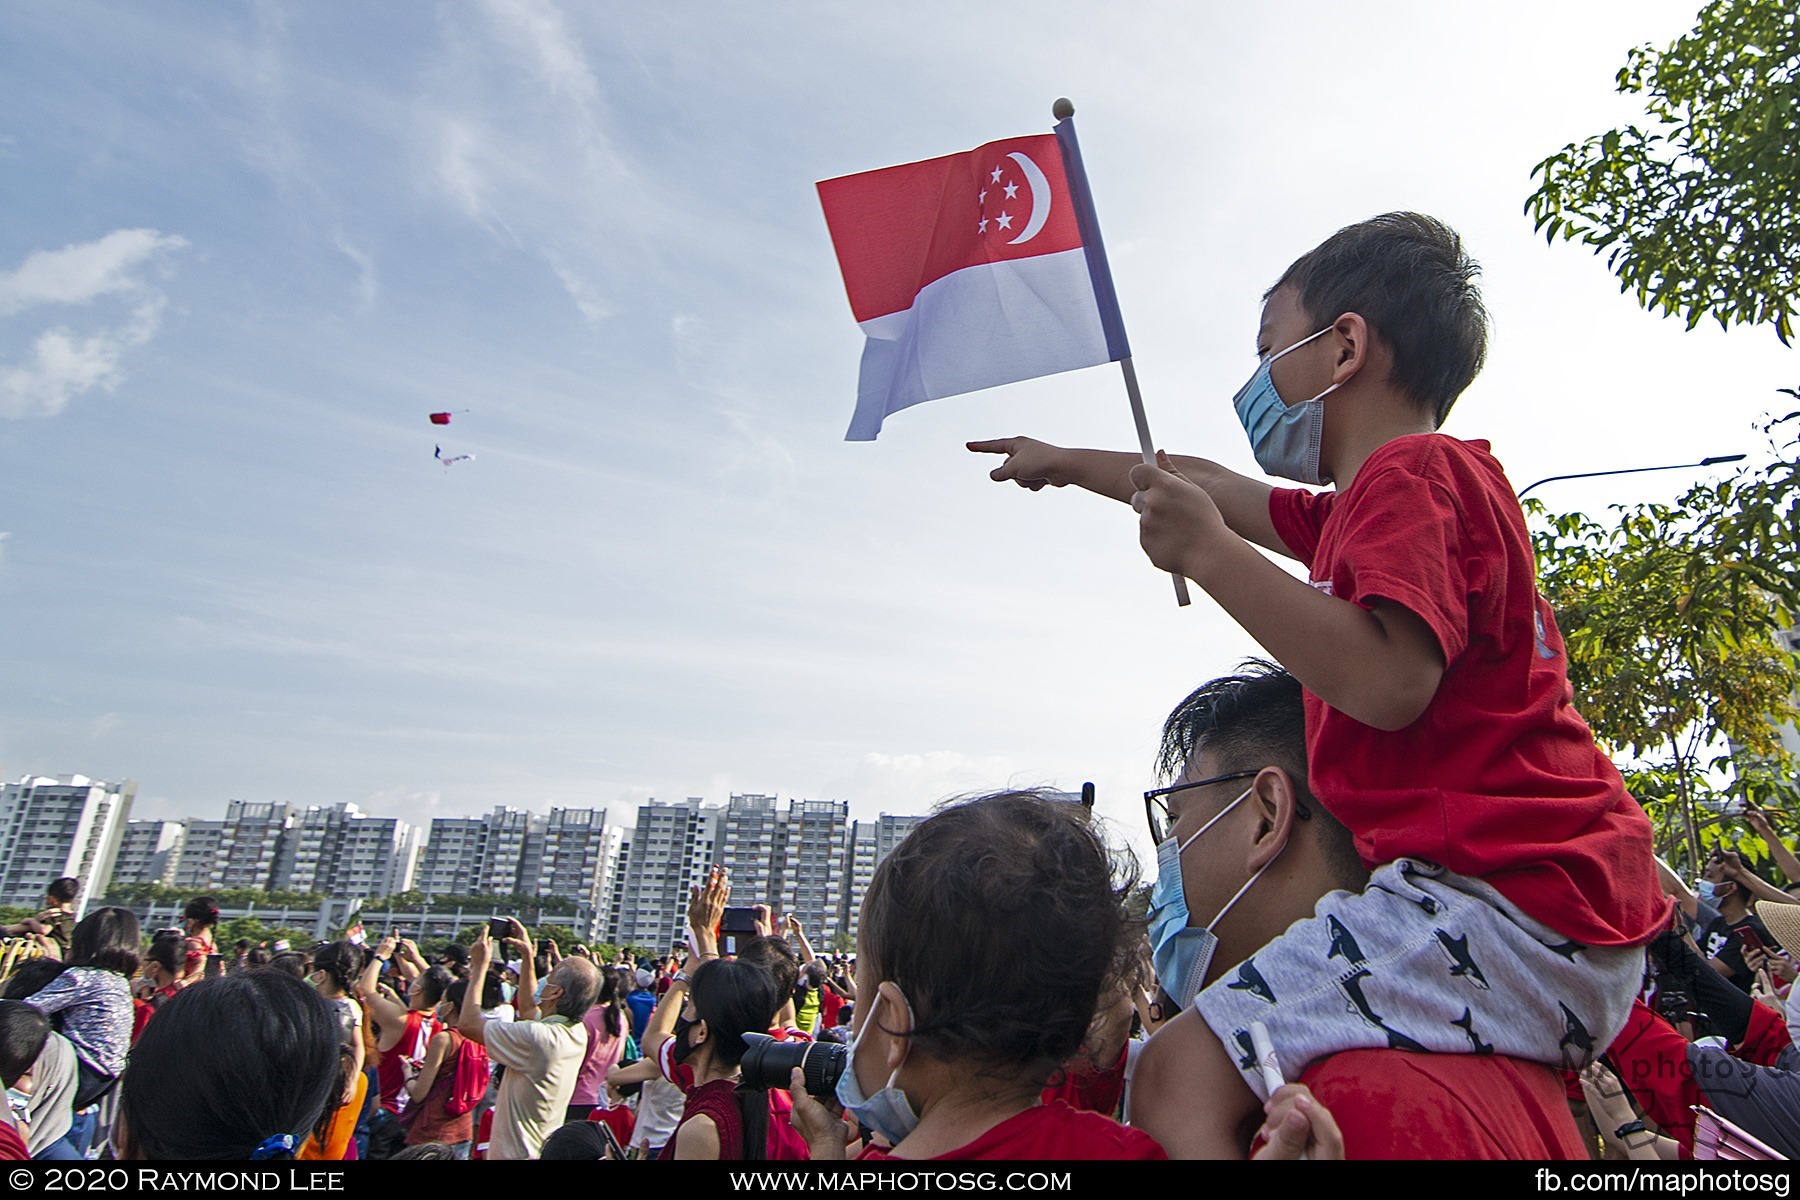 Spectators watch as the Red Lions descent into the heartlands in Sengkang.